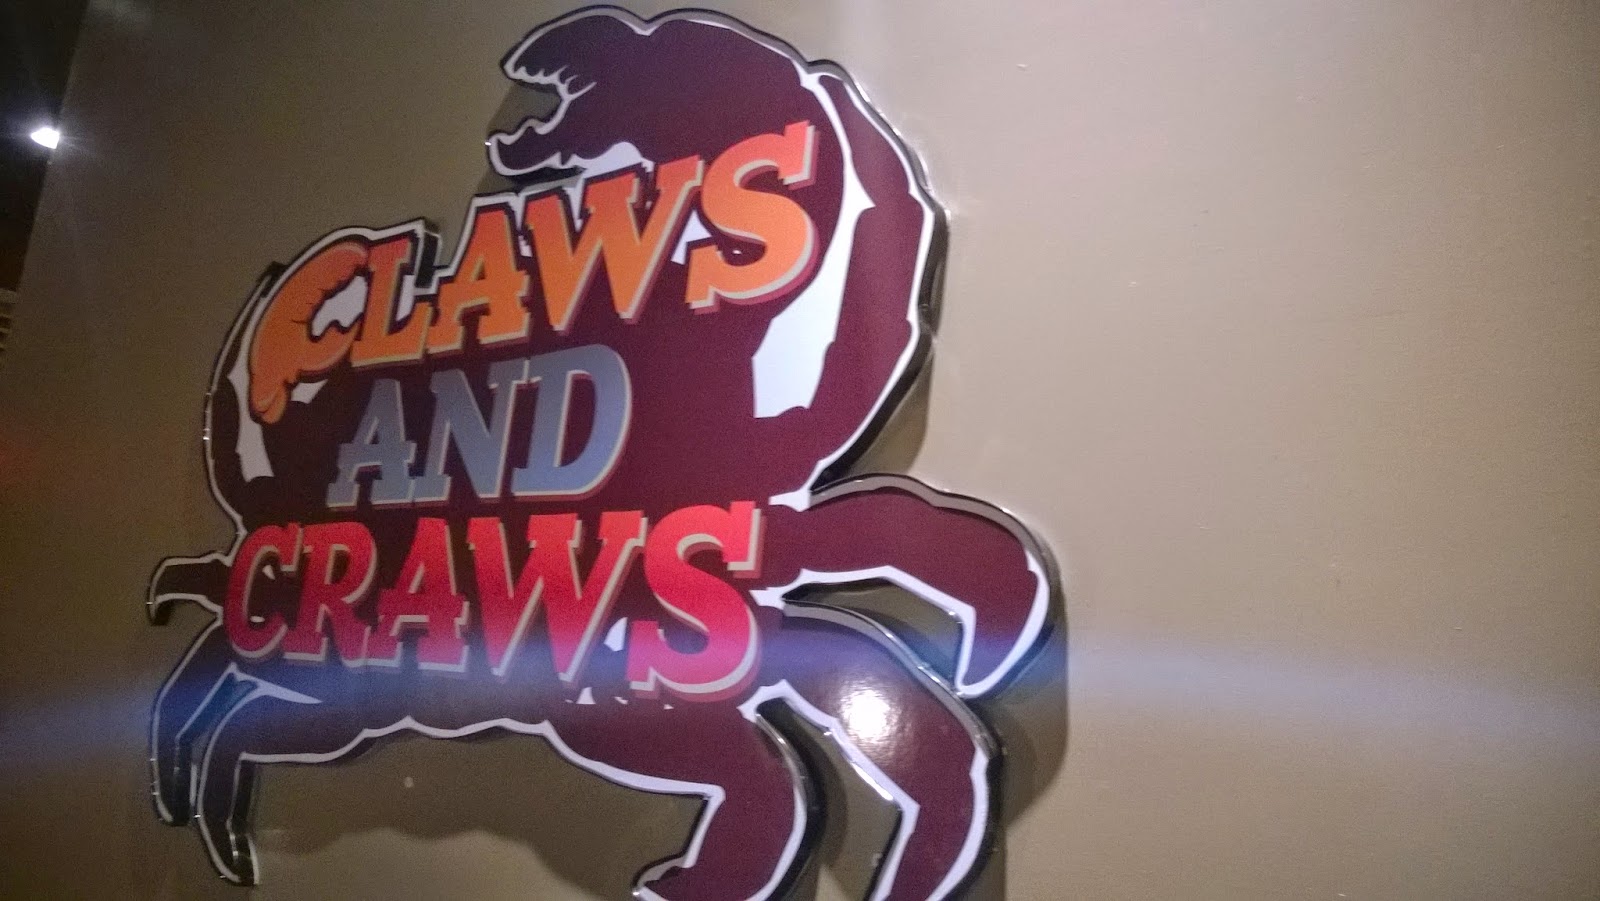 Claws and Craws